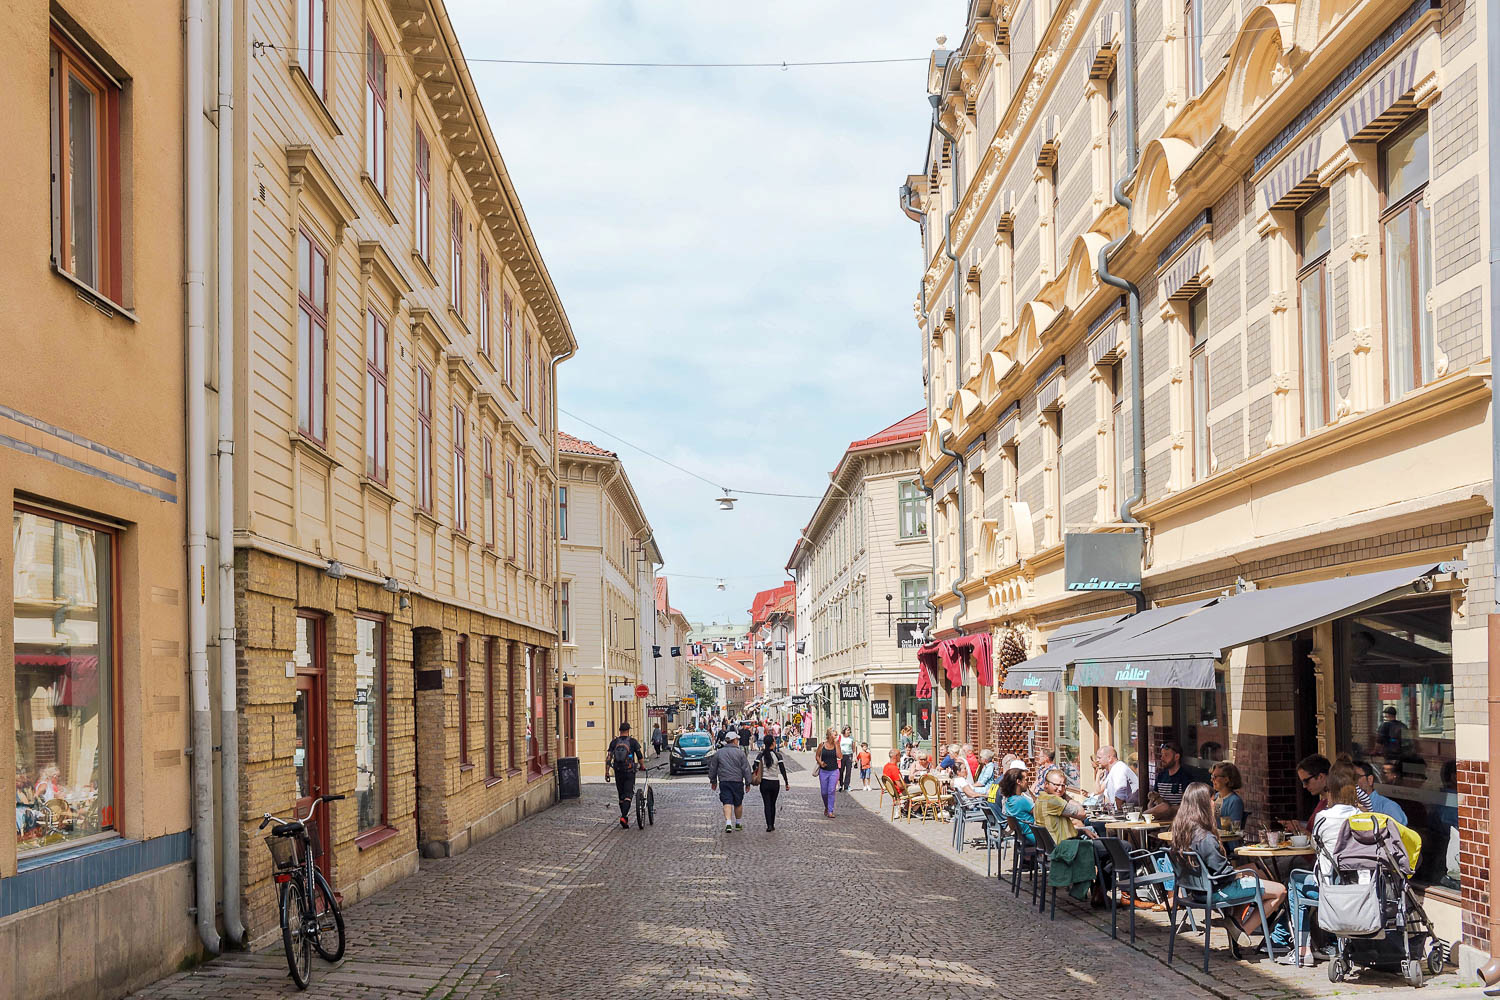 Haga, one of the oldest neighborhoods in Gothenburg, full of beautiful shops, cafes, and cobblestone streets making it a great place to explore